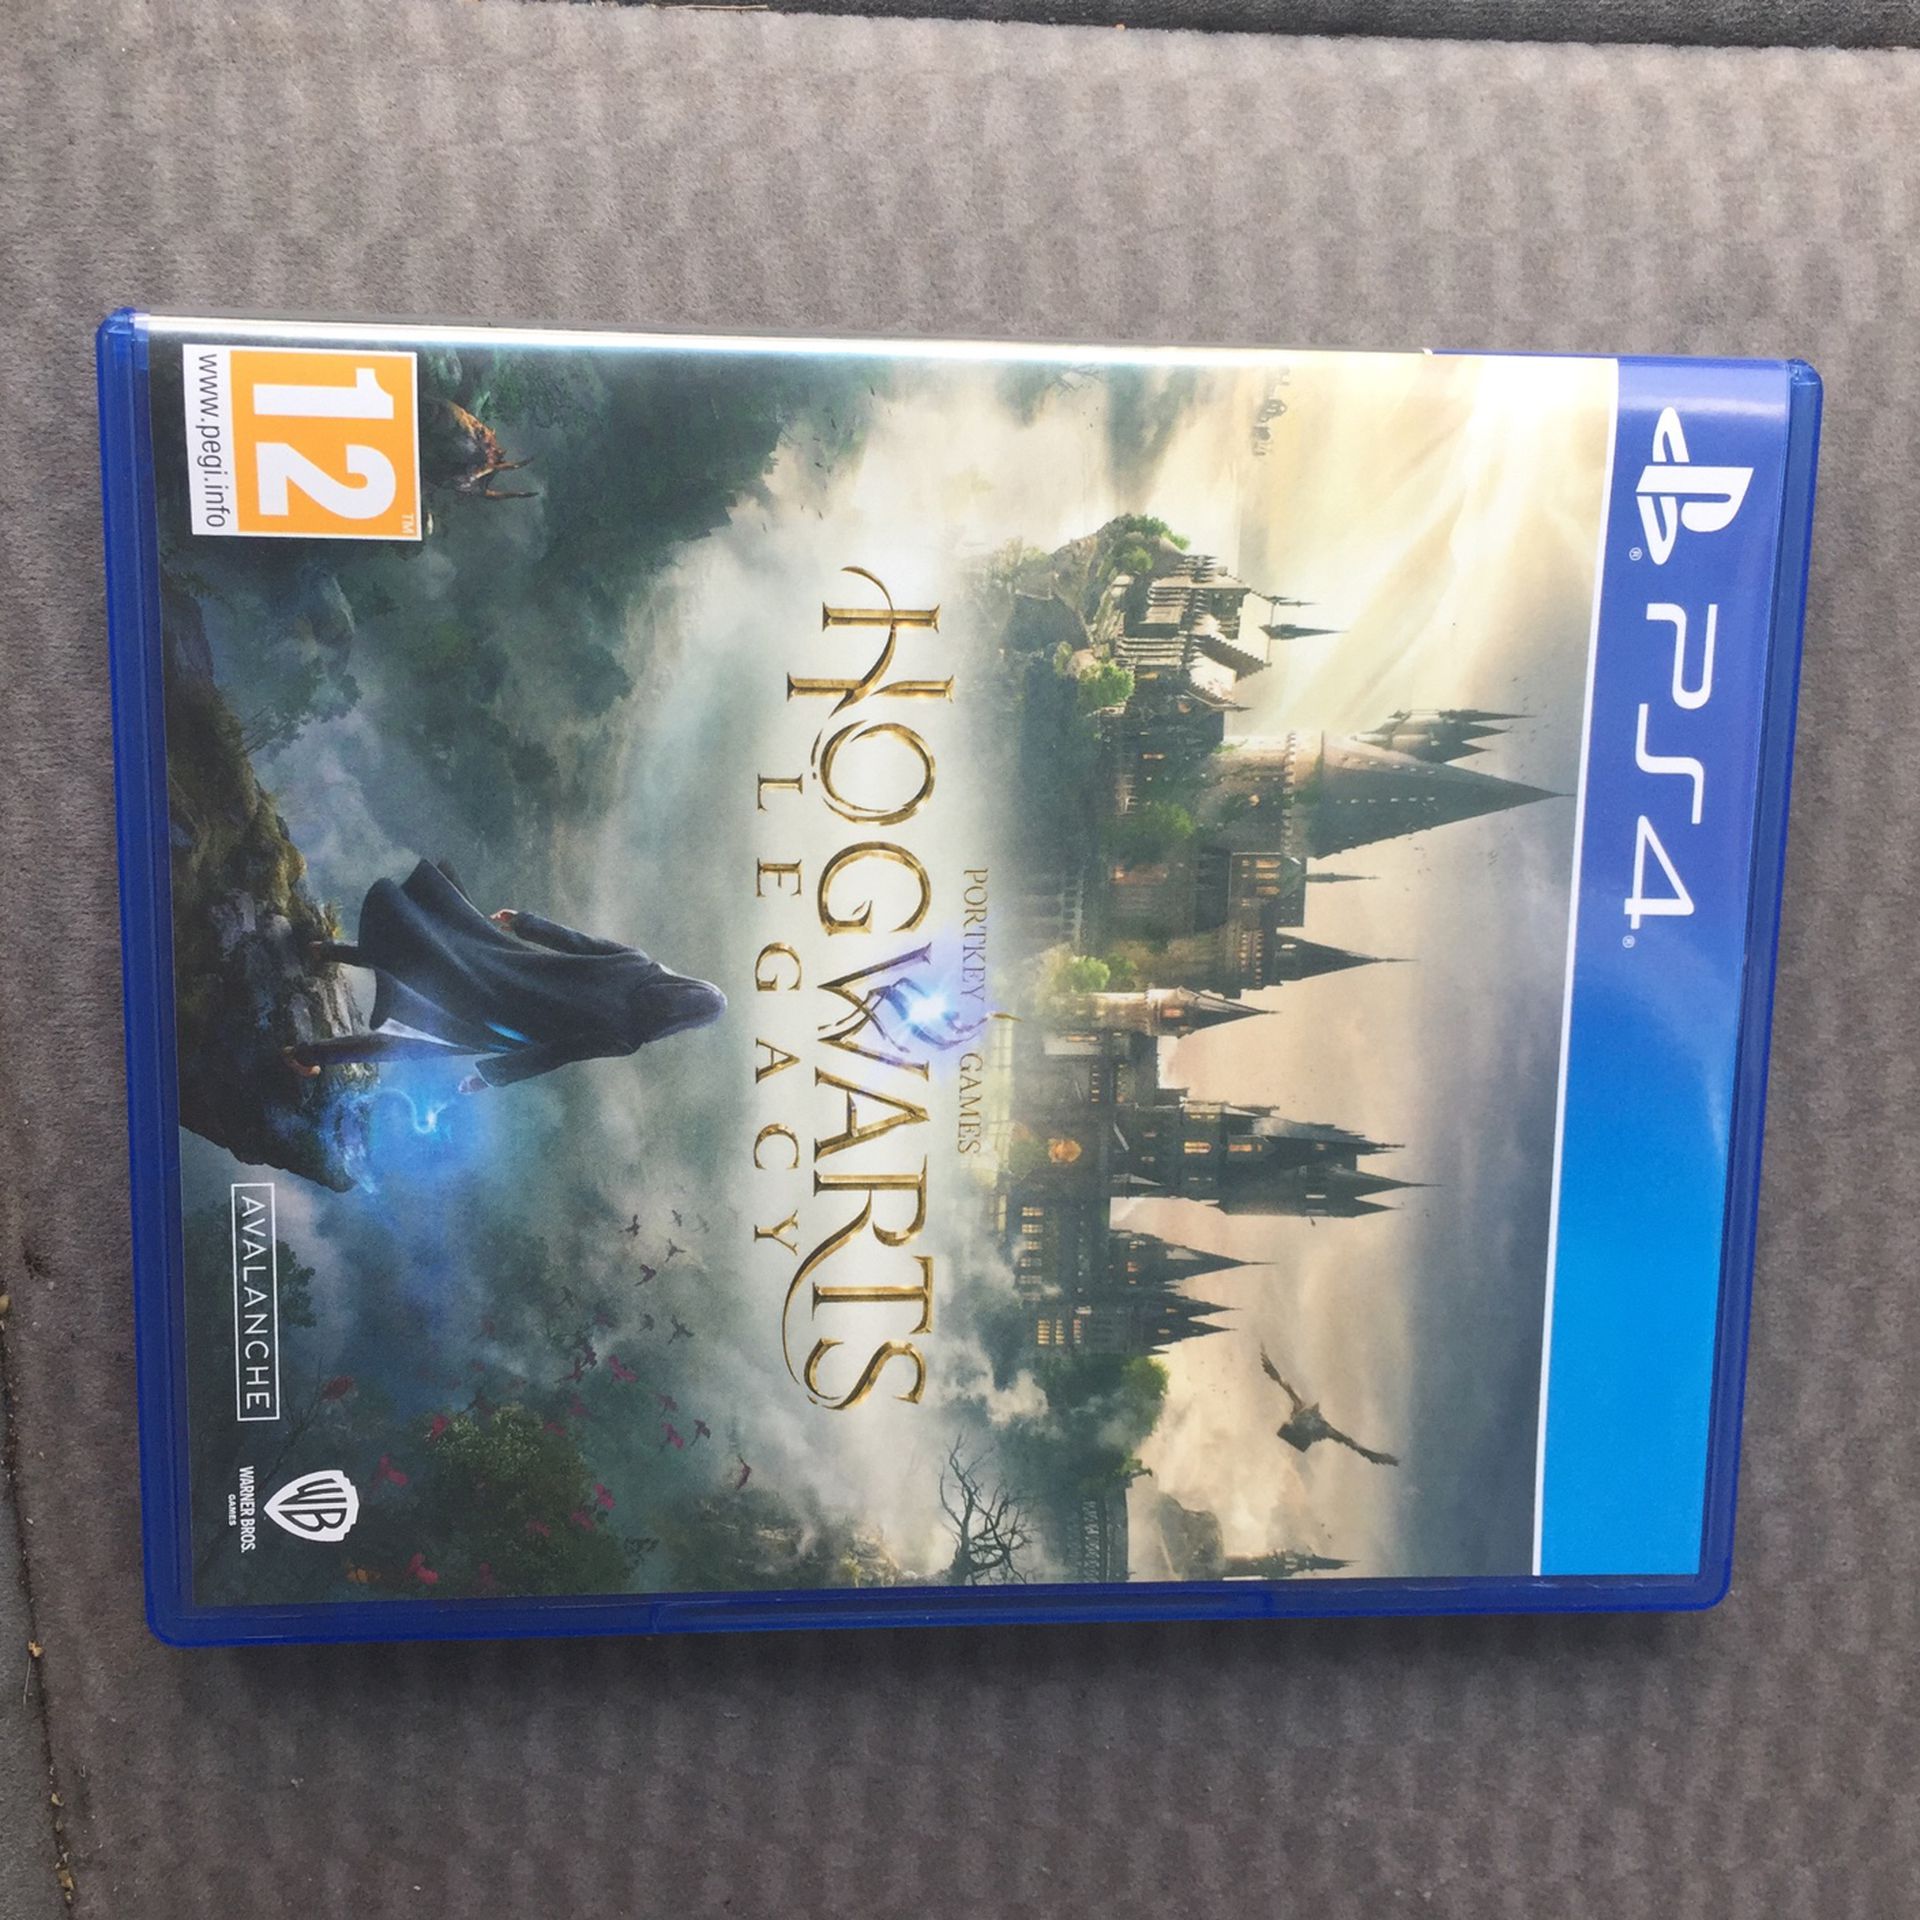 Hogwarts Legacy PS4 Deluxe Edition for Sale in Laud By Sea, FL - OfferUp